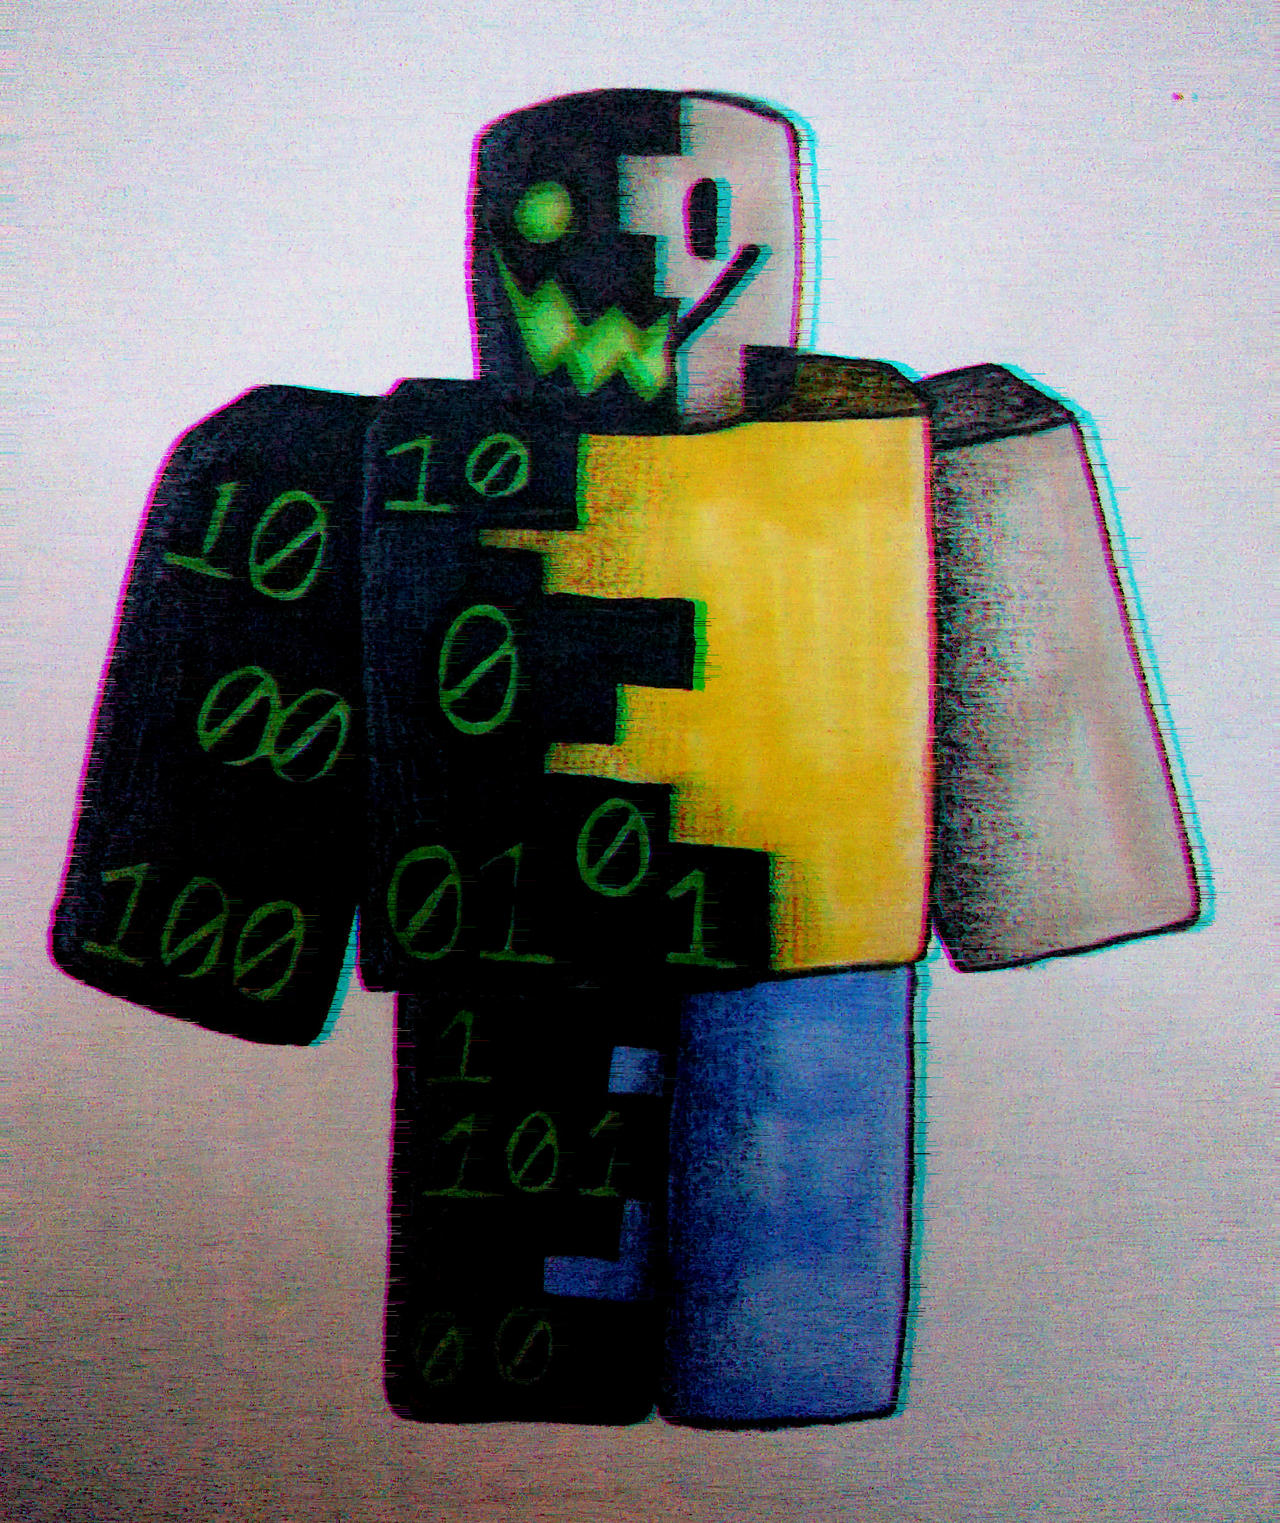 John doe is to hack everyone on roblox march 18 by Bryan95549 on DeviantArt